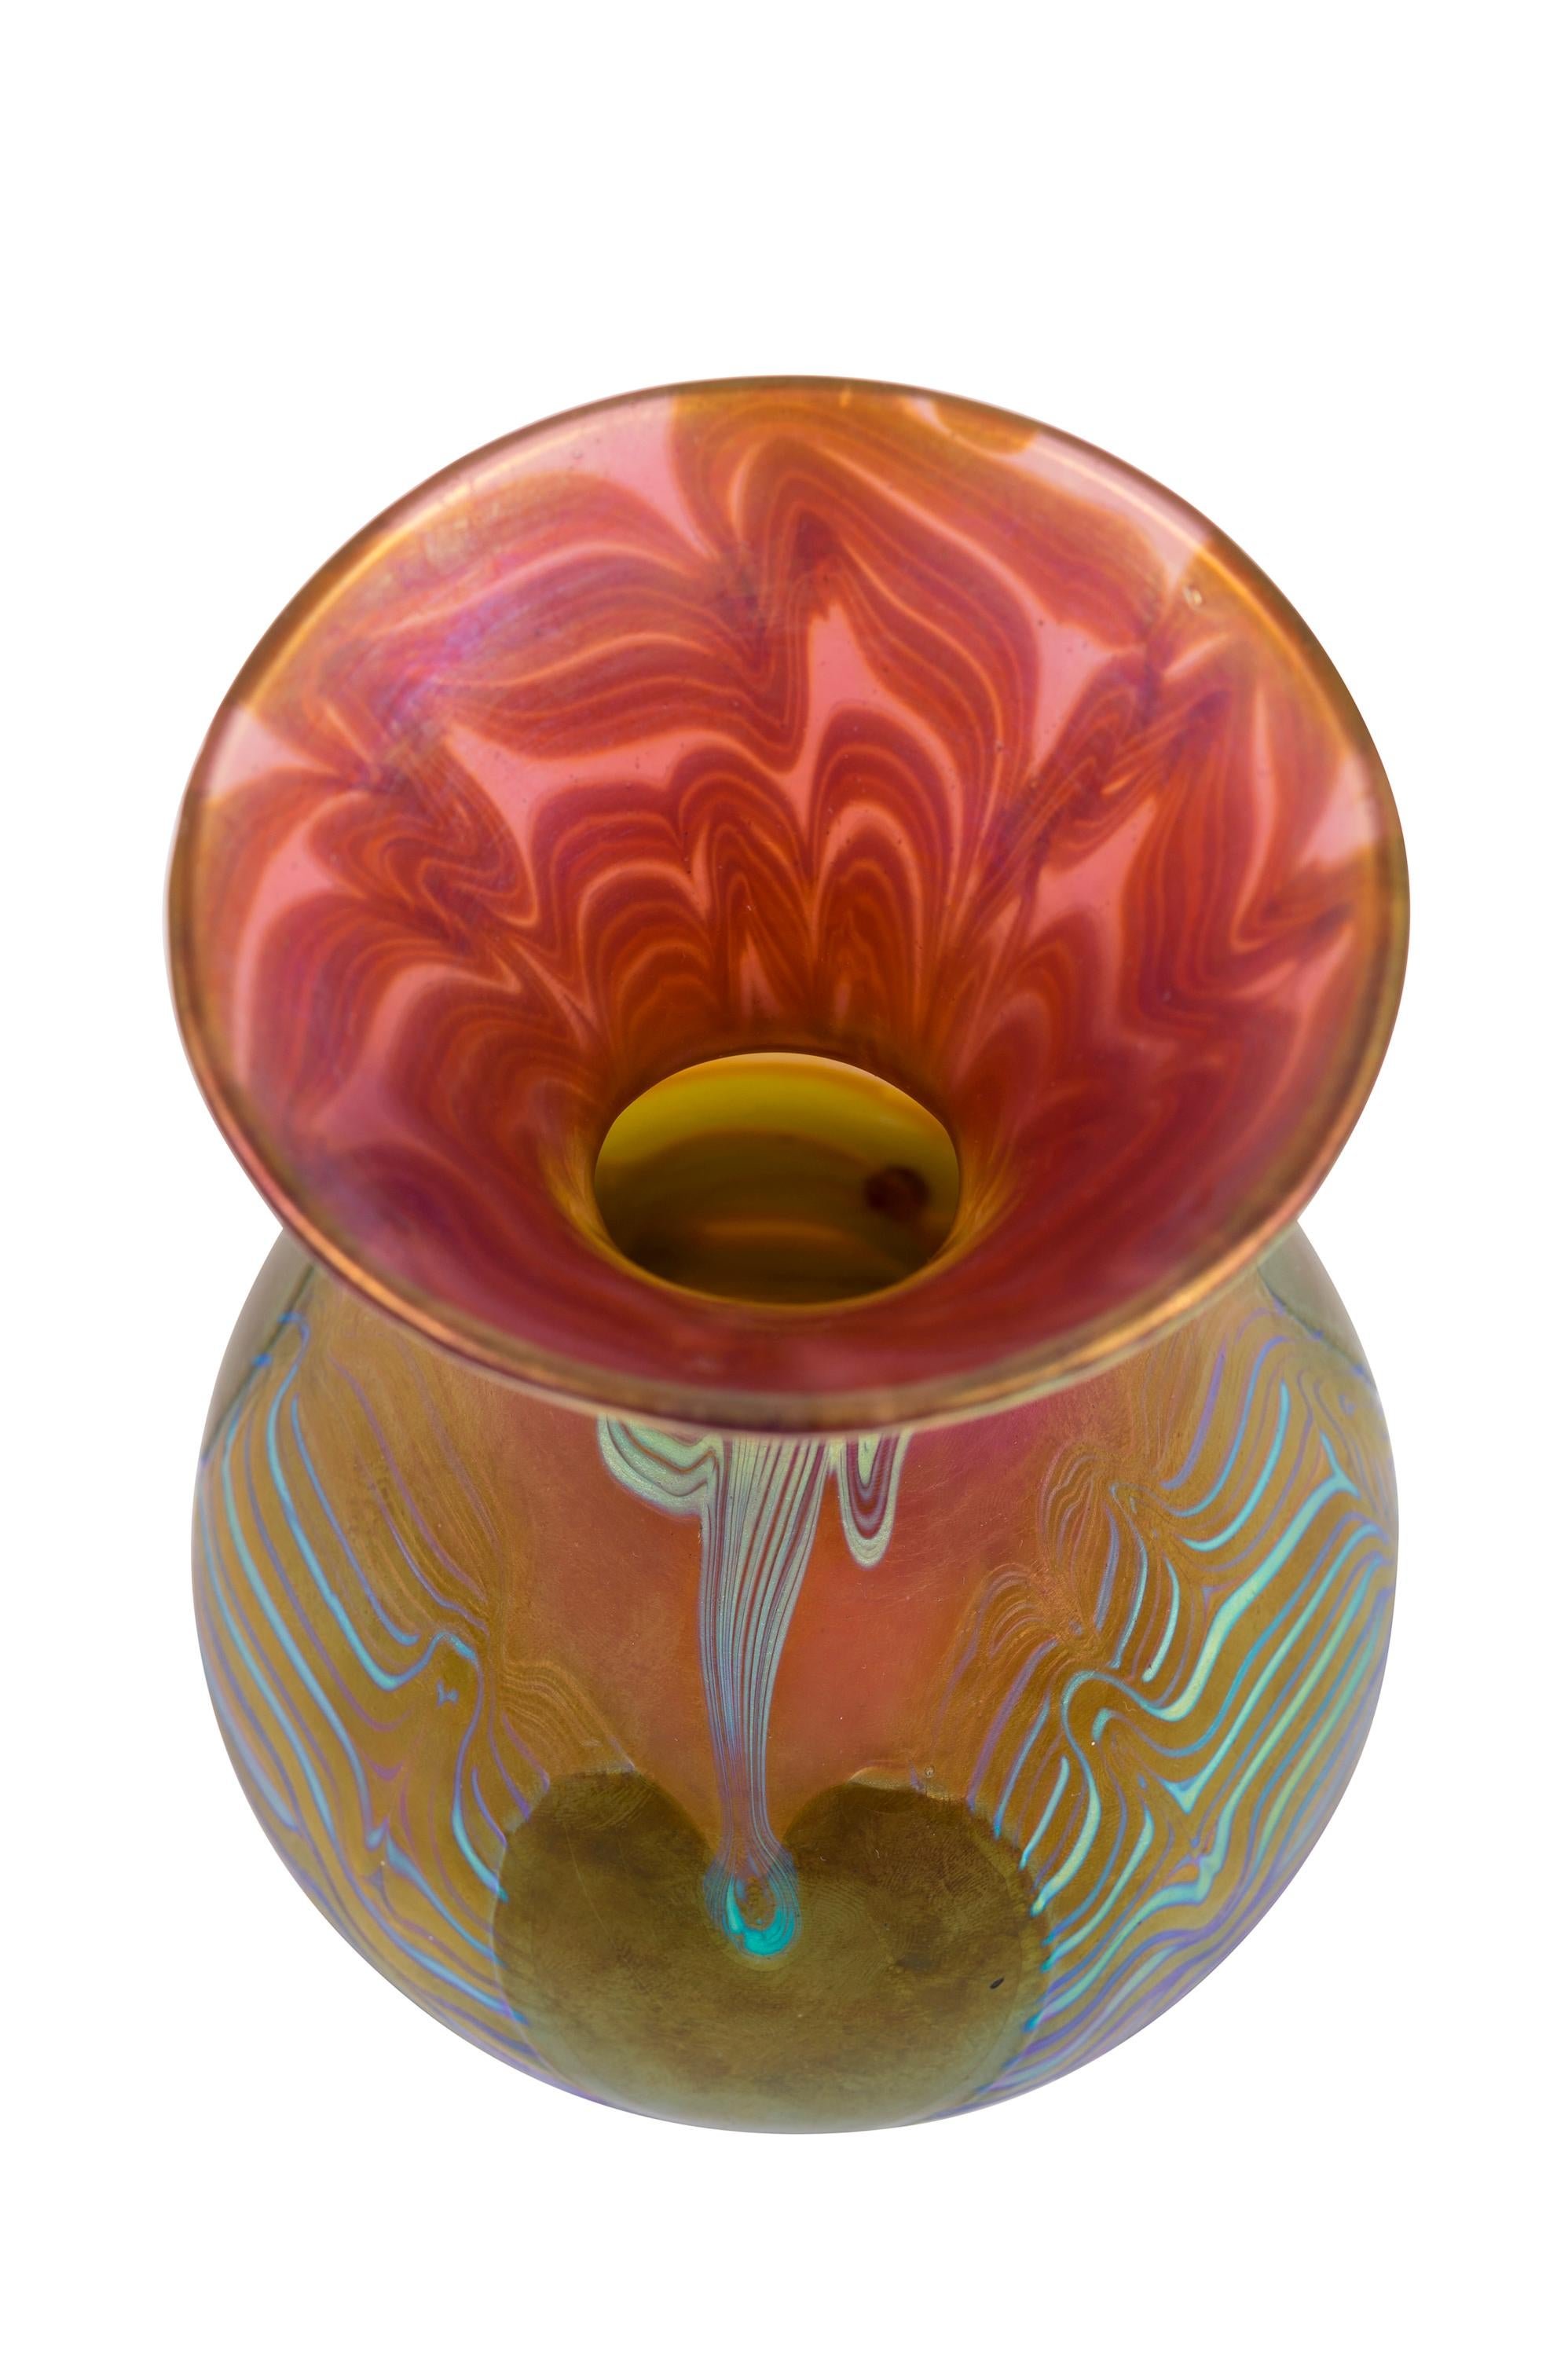 Glass Vase Loetz PG 3/492 Decoration circa 1903 Pink Green Blue Art Nouveau In Good Condition For Sale In Klosterneuburg, AT